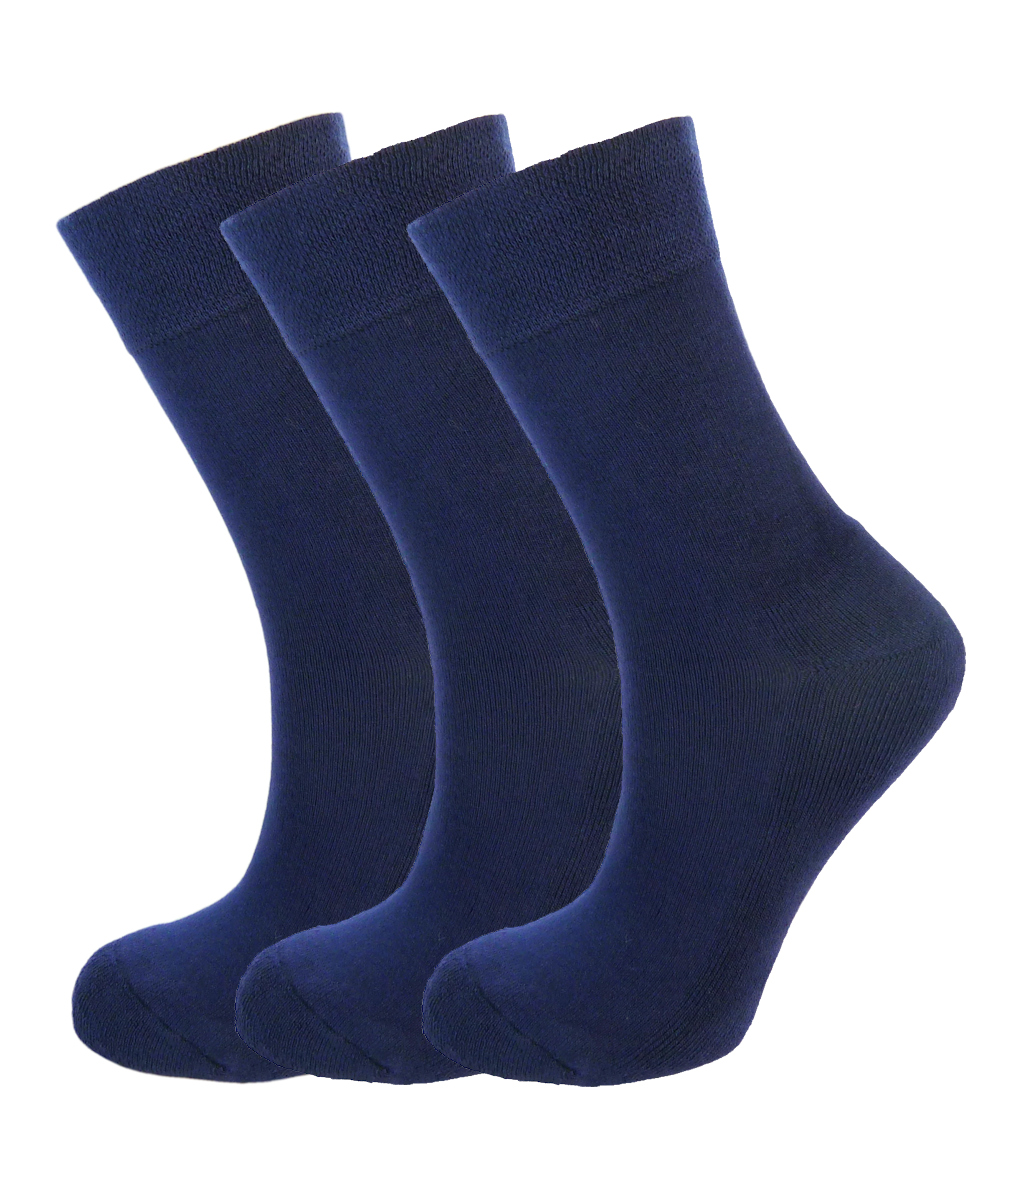 Green Bear Unisex Bamboo socks - Extra Cushioned Sole - 3 x NAVY pack - Luxurious soft & antibacterial